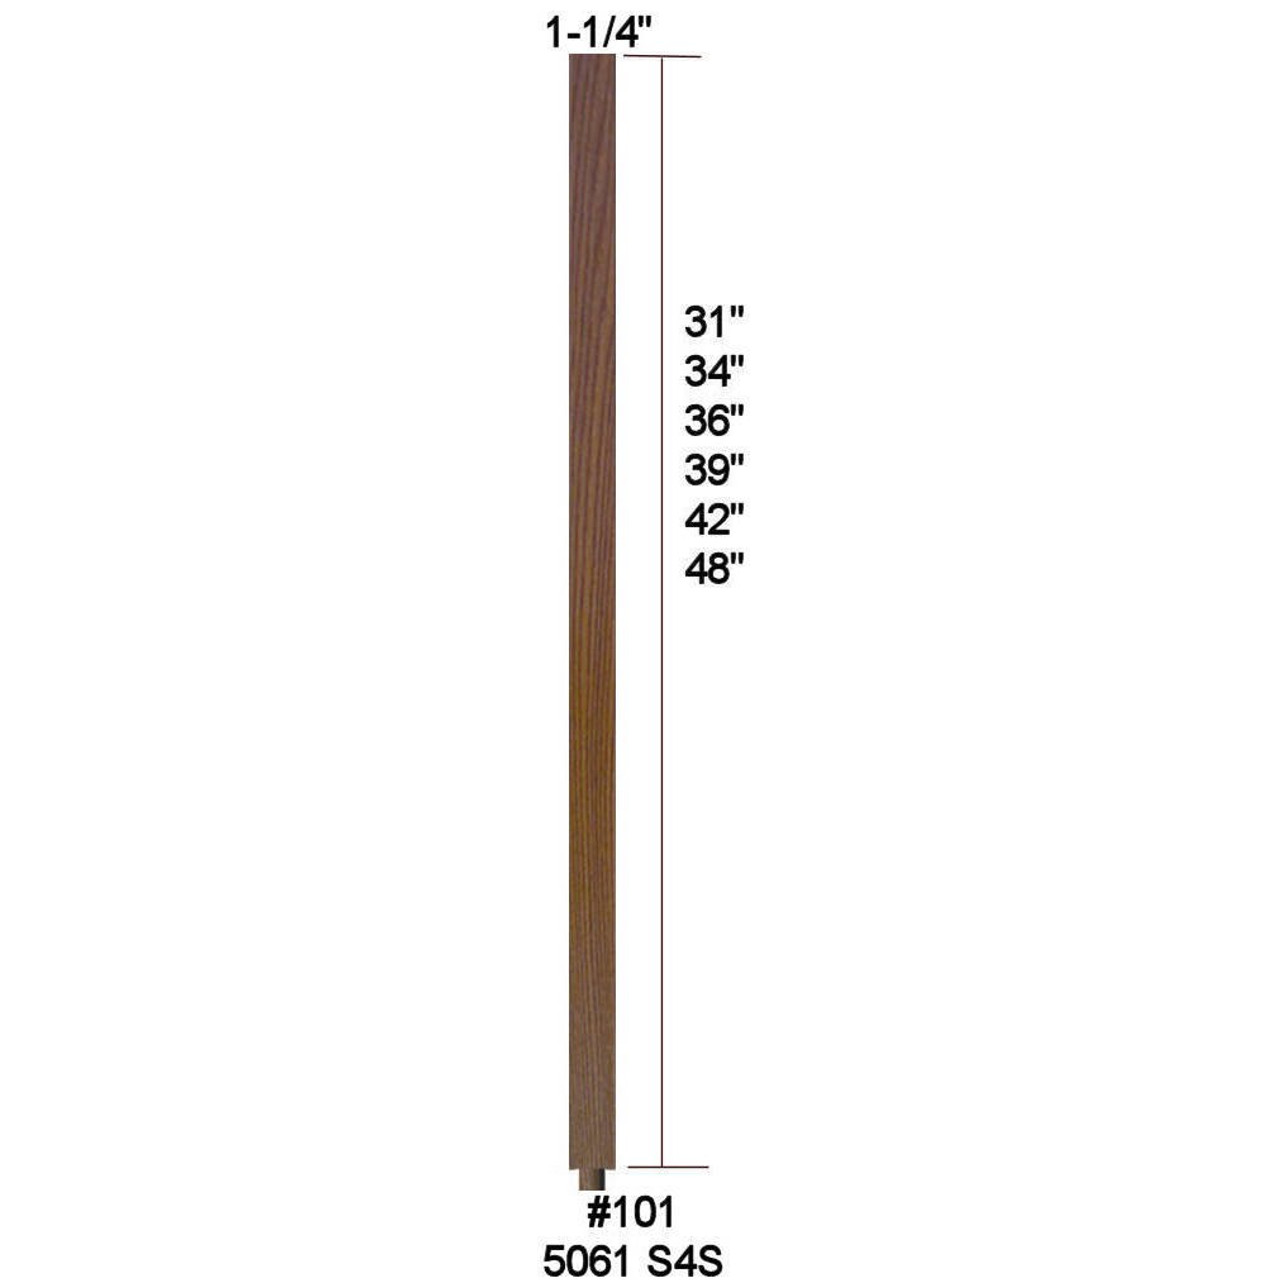 5060 (101) 1-1/4" S4S 36" Baluster, with dowel pin shipped separate